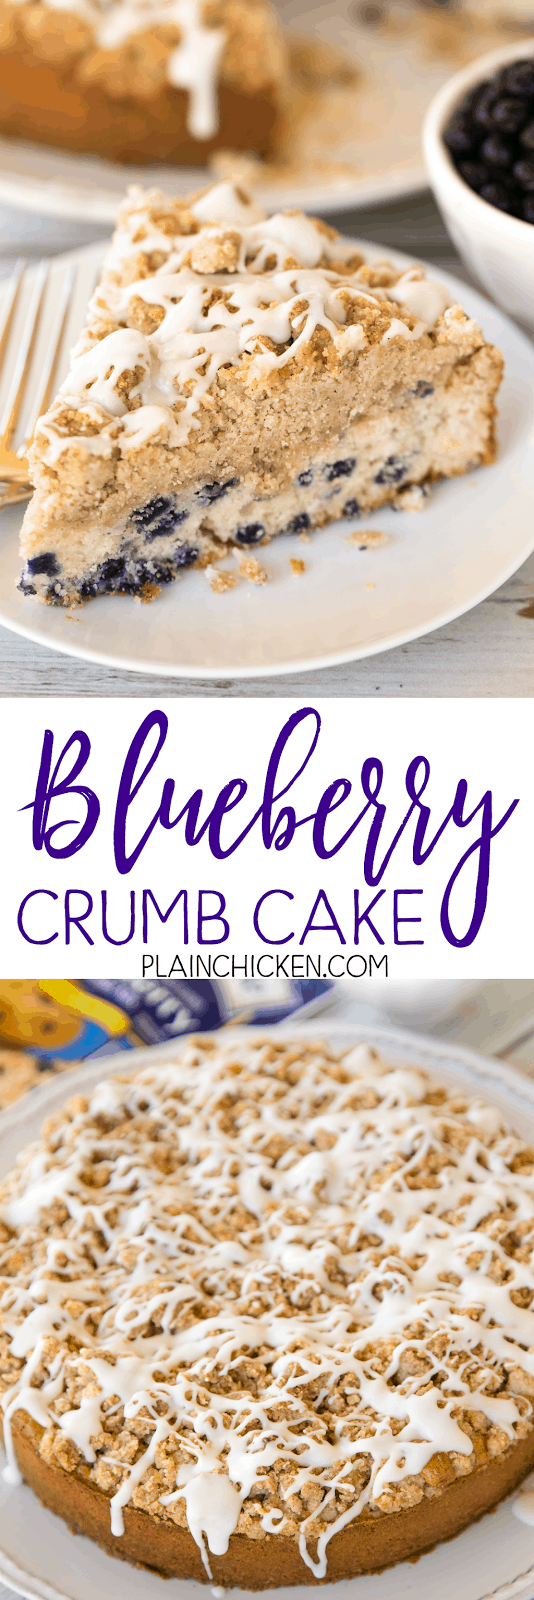 Blueberry Crumb Cake - easy and delicious breakfast treat! Blueberry muffin mix topped with an easy crumb topping. Seriously DELICIOUS! Martha White blueberry muffin mix, milk, sugar, brown sugar, cinnamon, flour, butter, powdered sugar, vanilla. Can make ahead and reheat in the morning. Great for breakfast or dessert!! YUM!